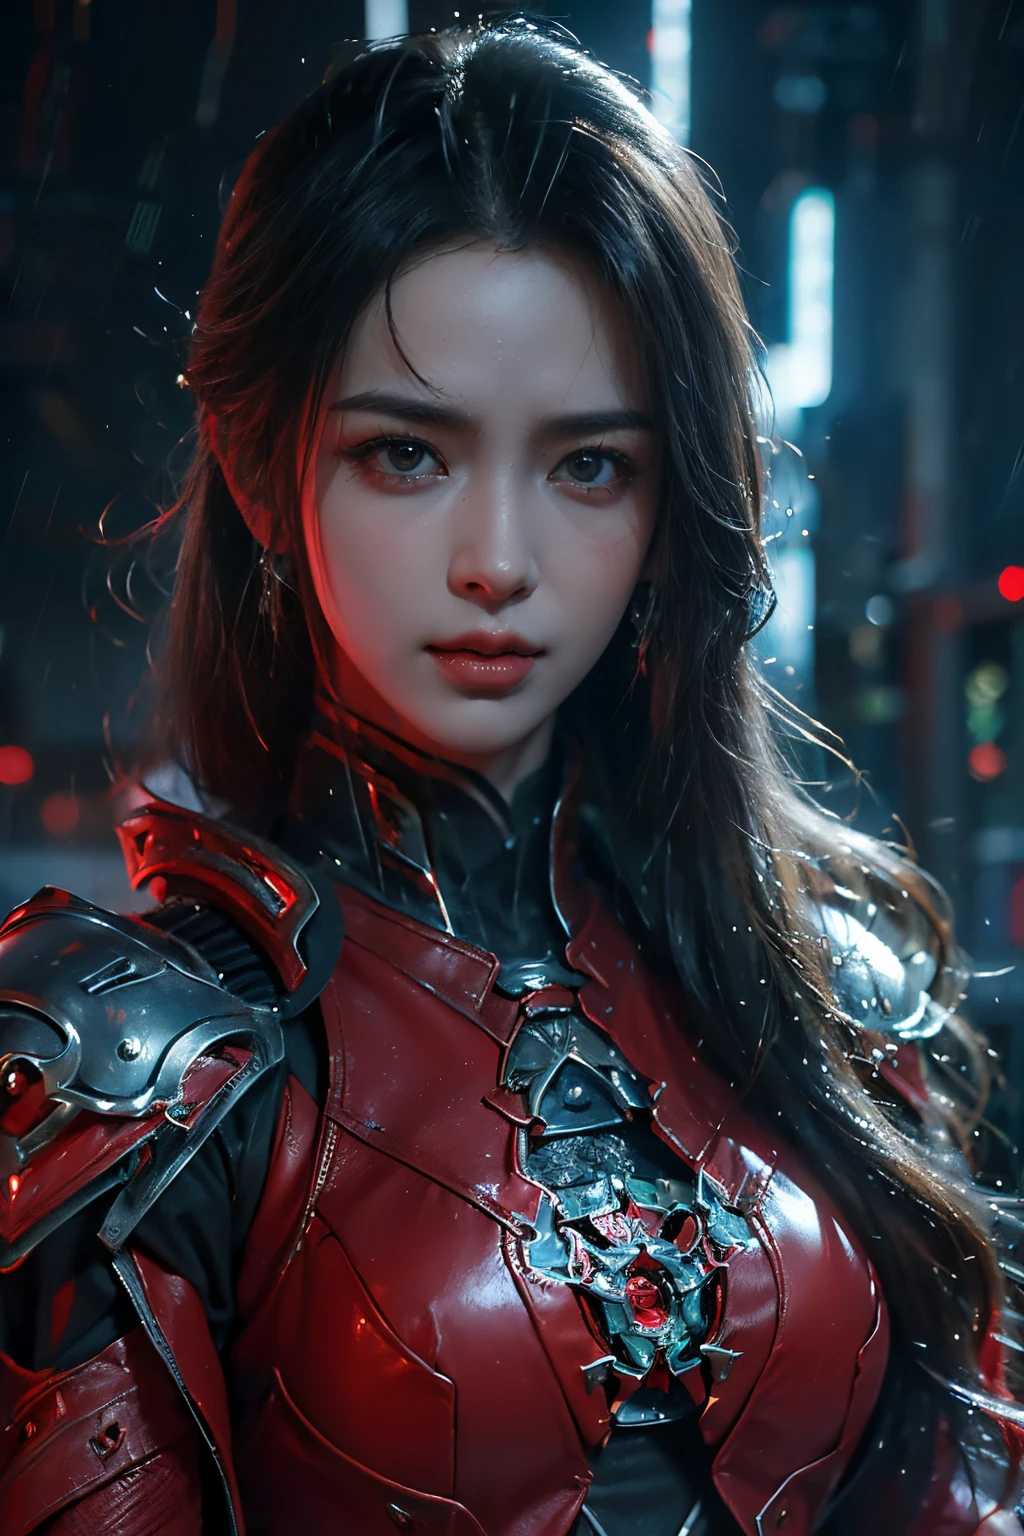 tmasterpiece,Best quality,A high resolution,8K,(Portrait photograph:1.5),(ROriginal photo),real photograph,digital photography,(Combination of cyberpunk and fantasy style),(Female soldier),20-year-old girl,random hair style,By bangs,(Red eyeigchest, accessories,Redlip,(He frowned,Sneer),(Cyberpunk combined with fantasy style clothing,Openwork design,joint armor,police uniforms,Red clothes,red colour),exposing your navel,Photo pose,Realisticstyle,Thunder and lightning on rainy day,(Thunder magic),oc render reflection texture